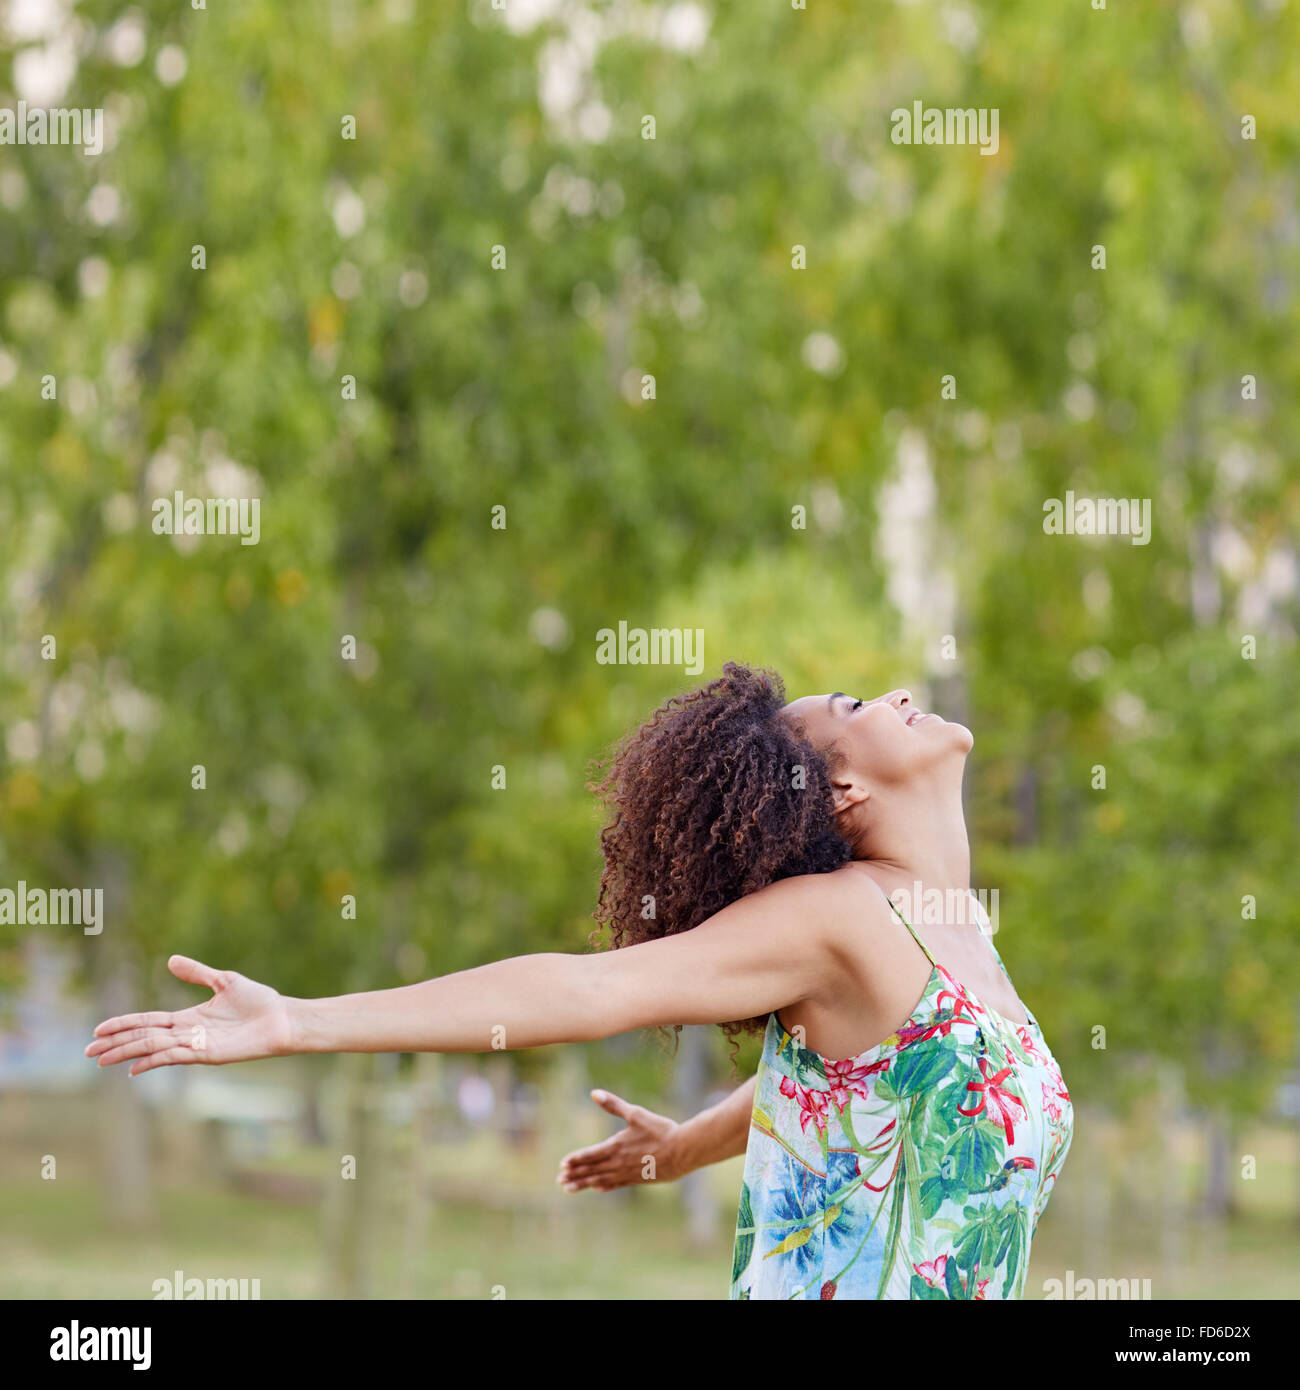 Woman with an afro hairstyle feeling free in a park Stock Photo